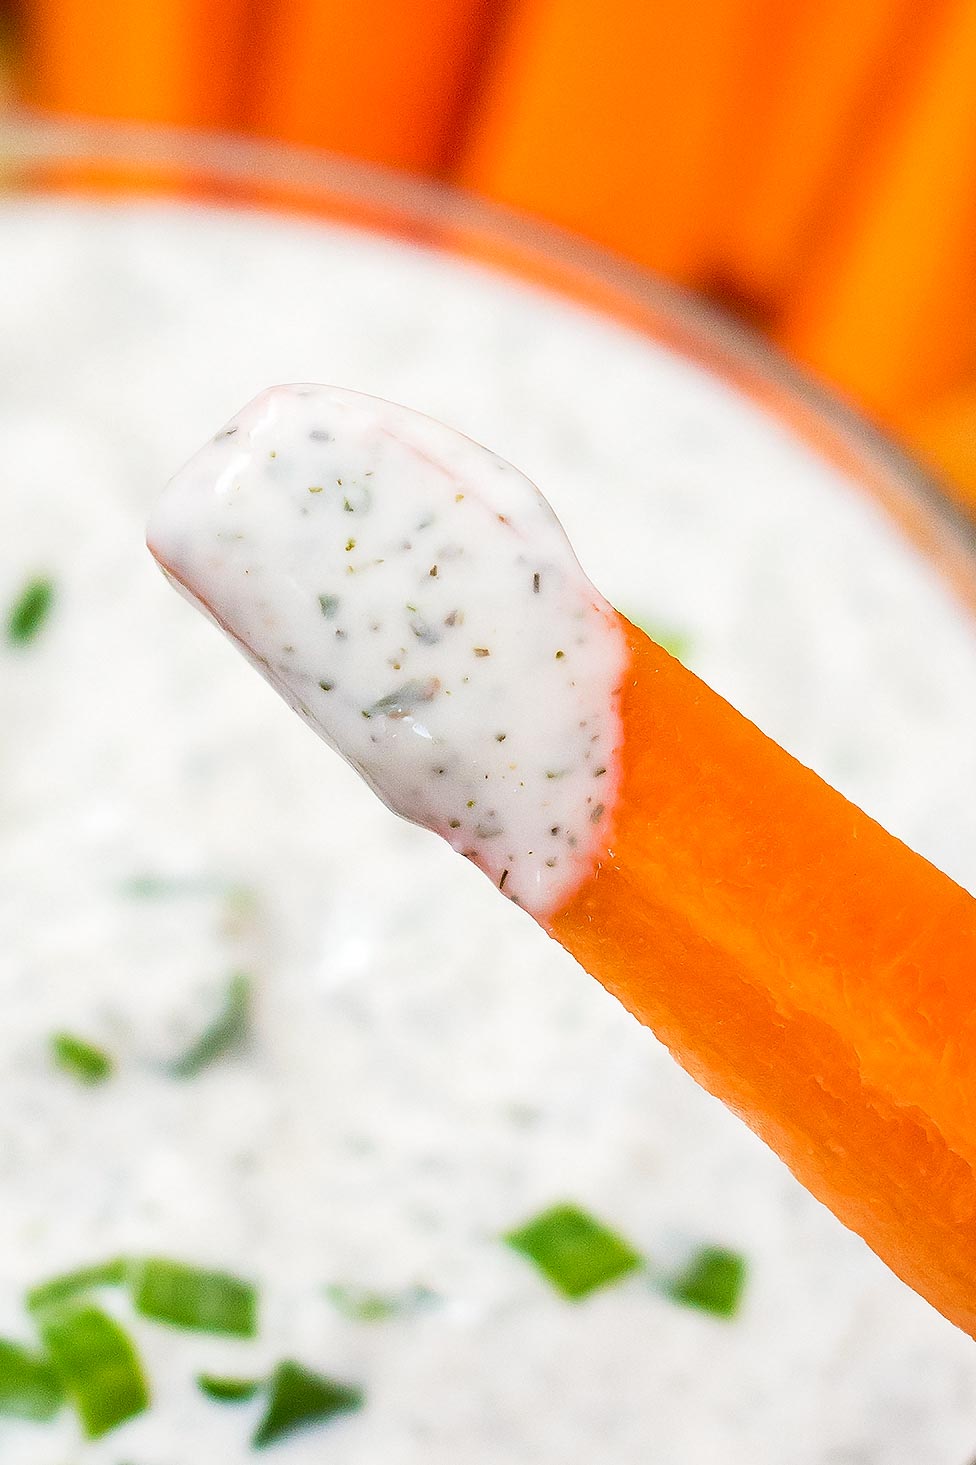 Carrot Stick dipped into ranch